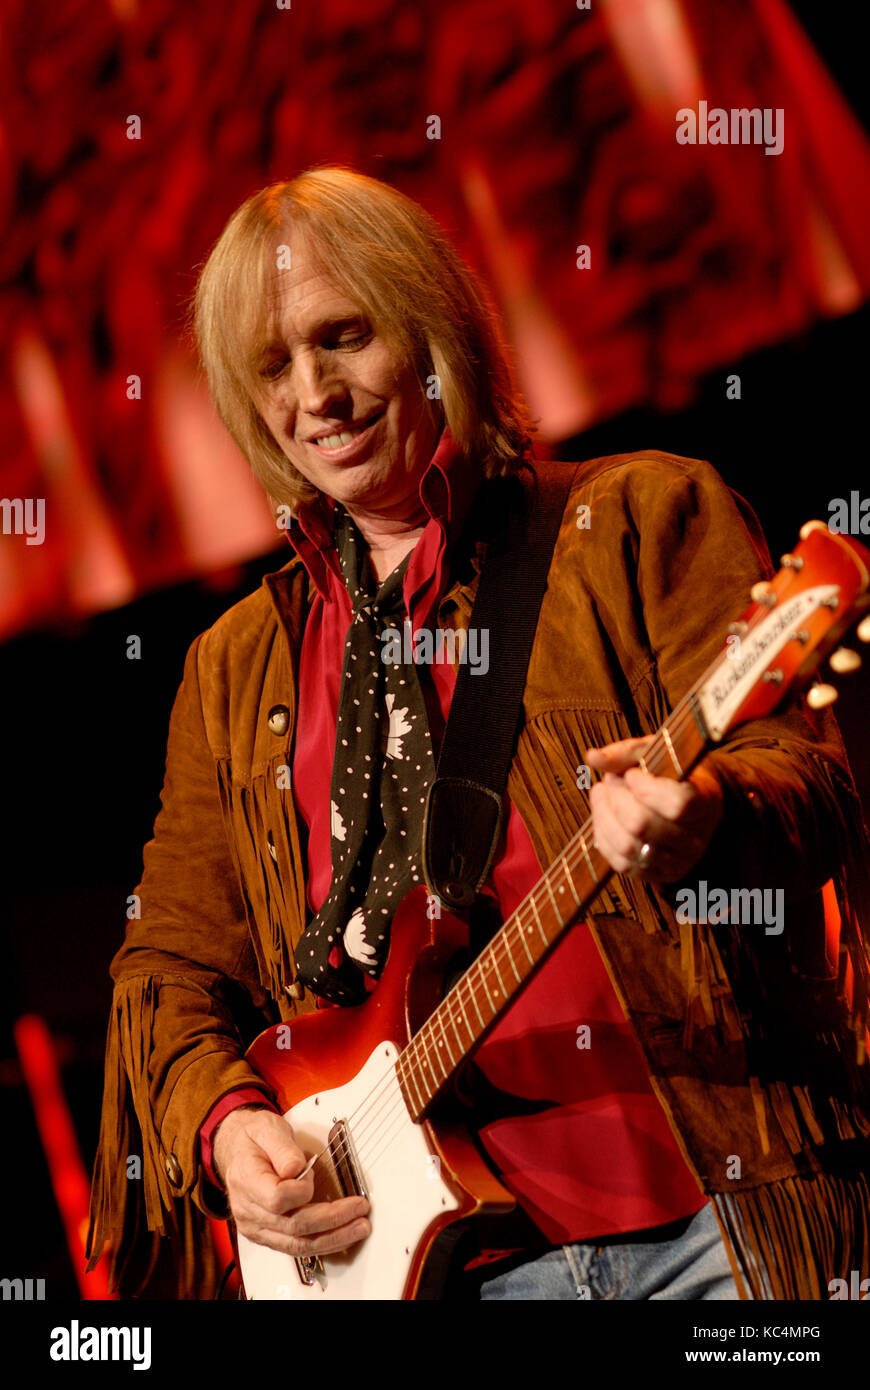 ST. PAUL, MN JUNE 26: Tom Petty & the Heartbreakers perform at Xcel Energy Center on June 26, 2006 in St. Paul, Minnesota. Credit: Tony Nelson/Mediapunch Inc. Stock Photo